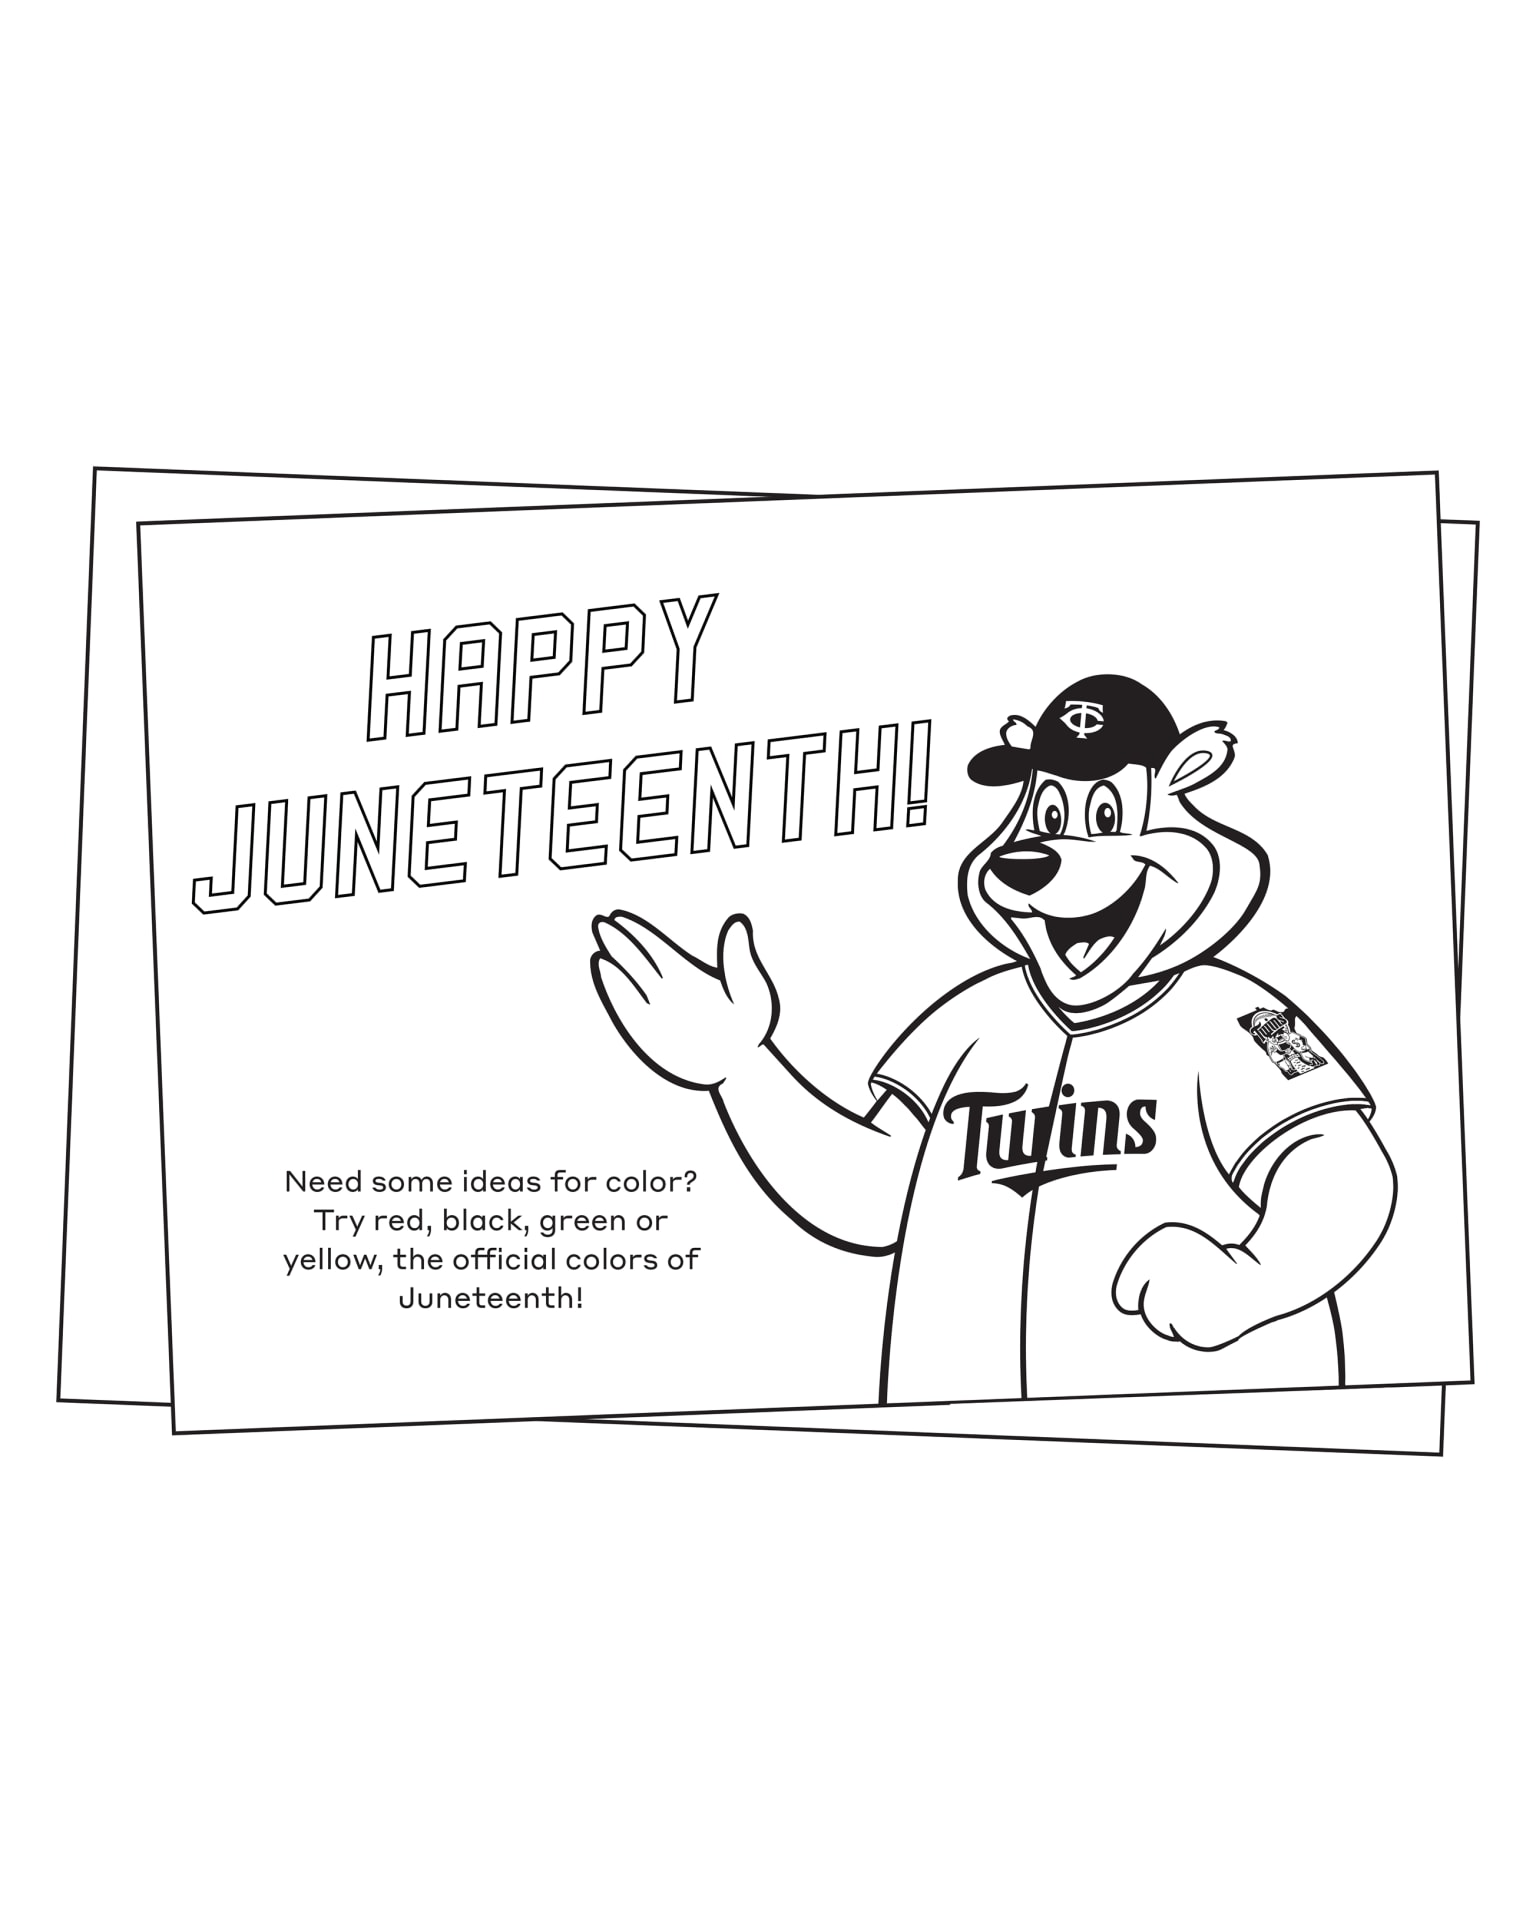 MLB Coloring Pages for Kids Printable Free Download 